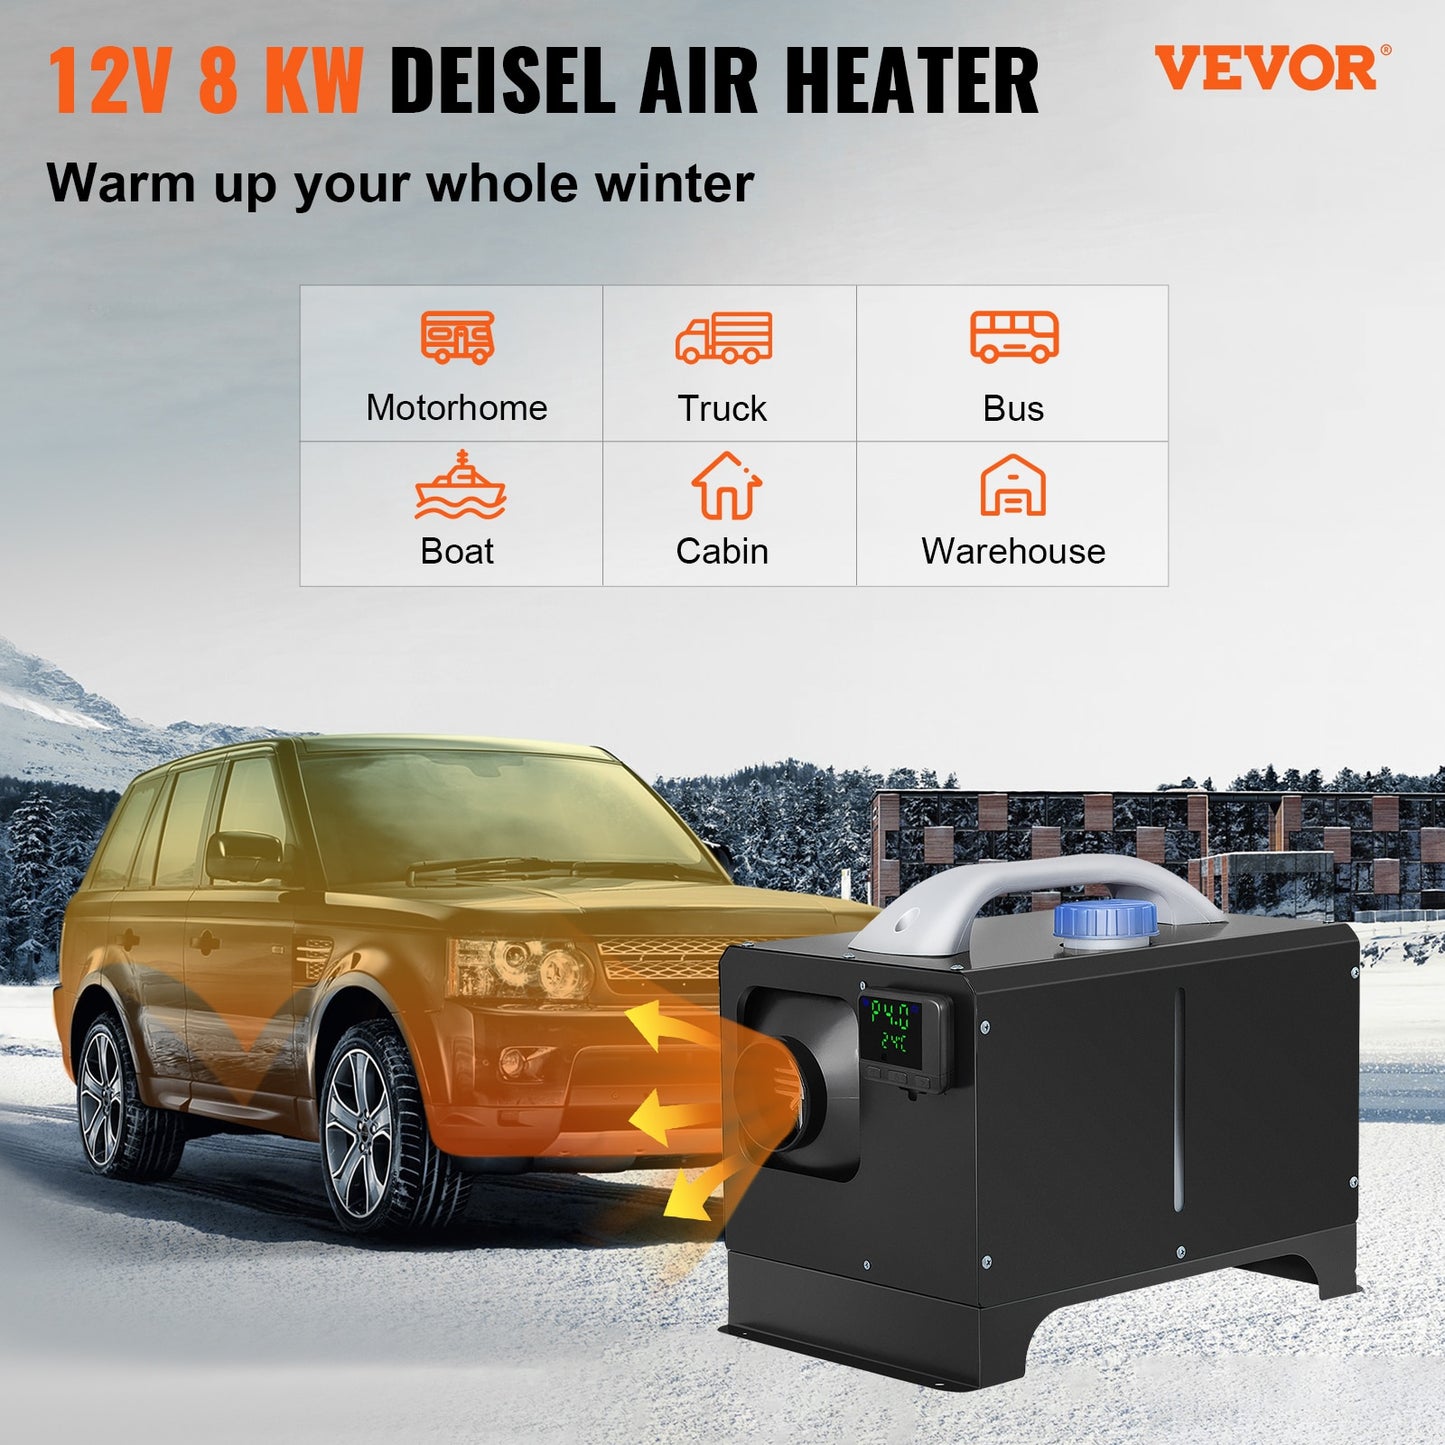 VEVOR 3 / 5 / 8KW 12V Diesel Air Heater All-in-One Mini Heater with Silencer LCD Switch Remote Control for Car Bus RV Trucks SUV